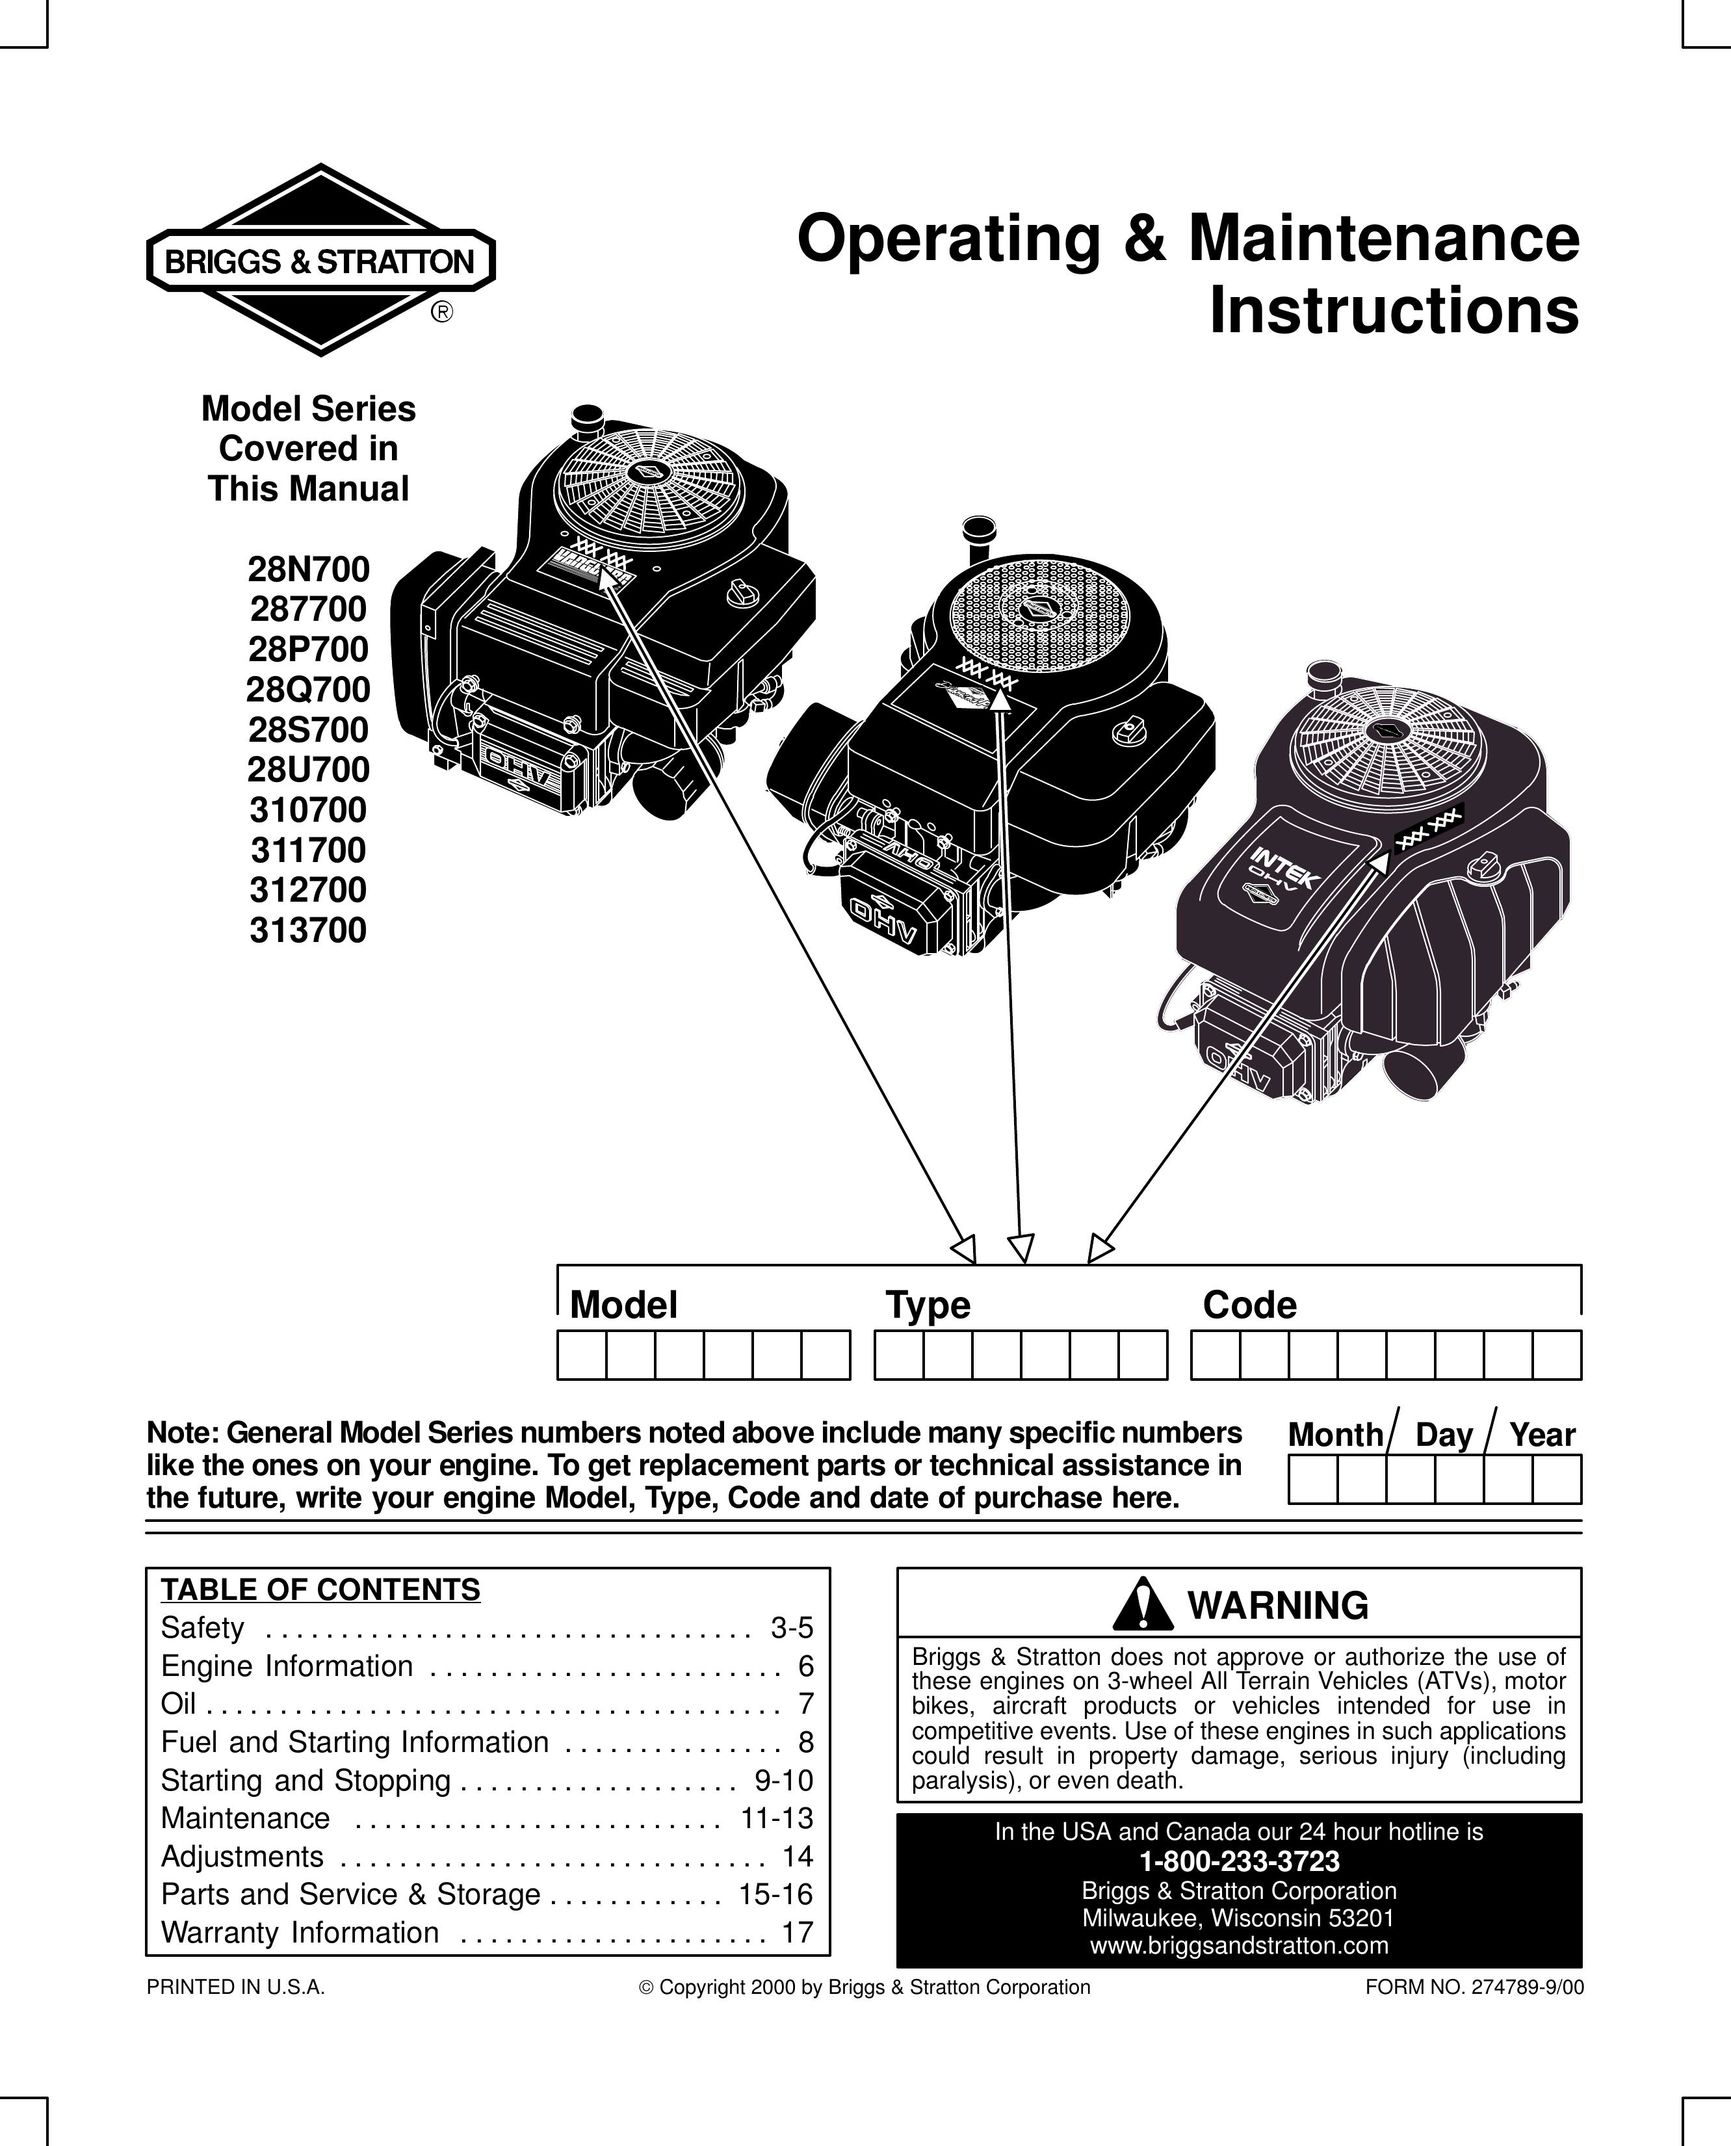 Briggs & Stratton 28S700 Air Cleaner User Manual